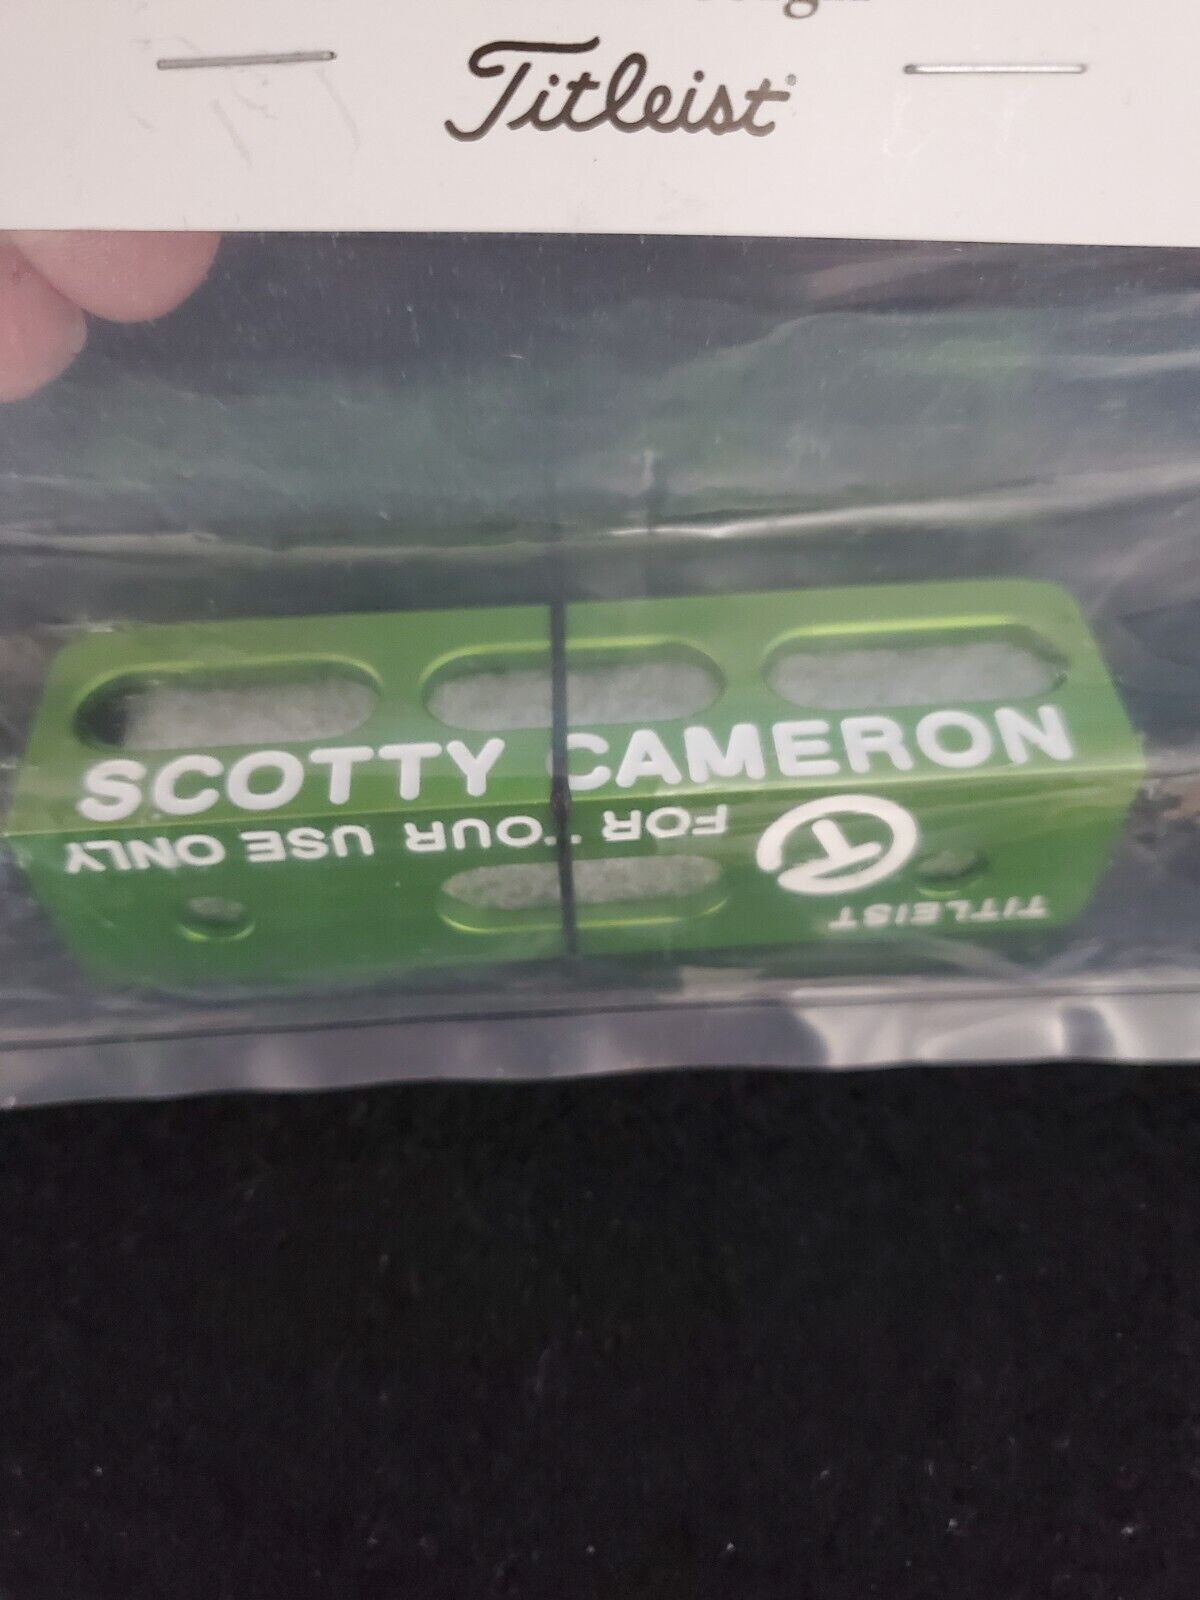 Scotty Cameron Special Limited Masters Edition Putting Path Tool Misted Bright